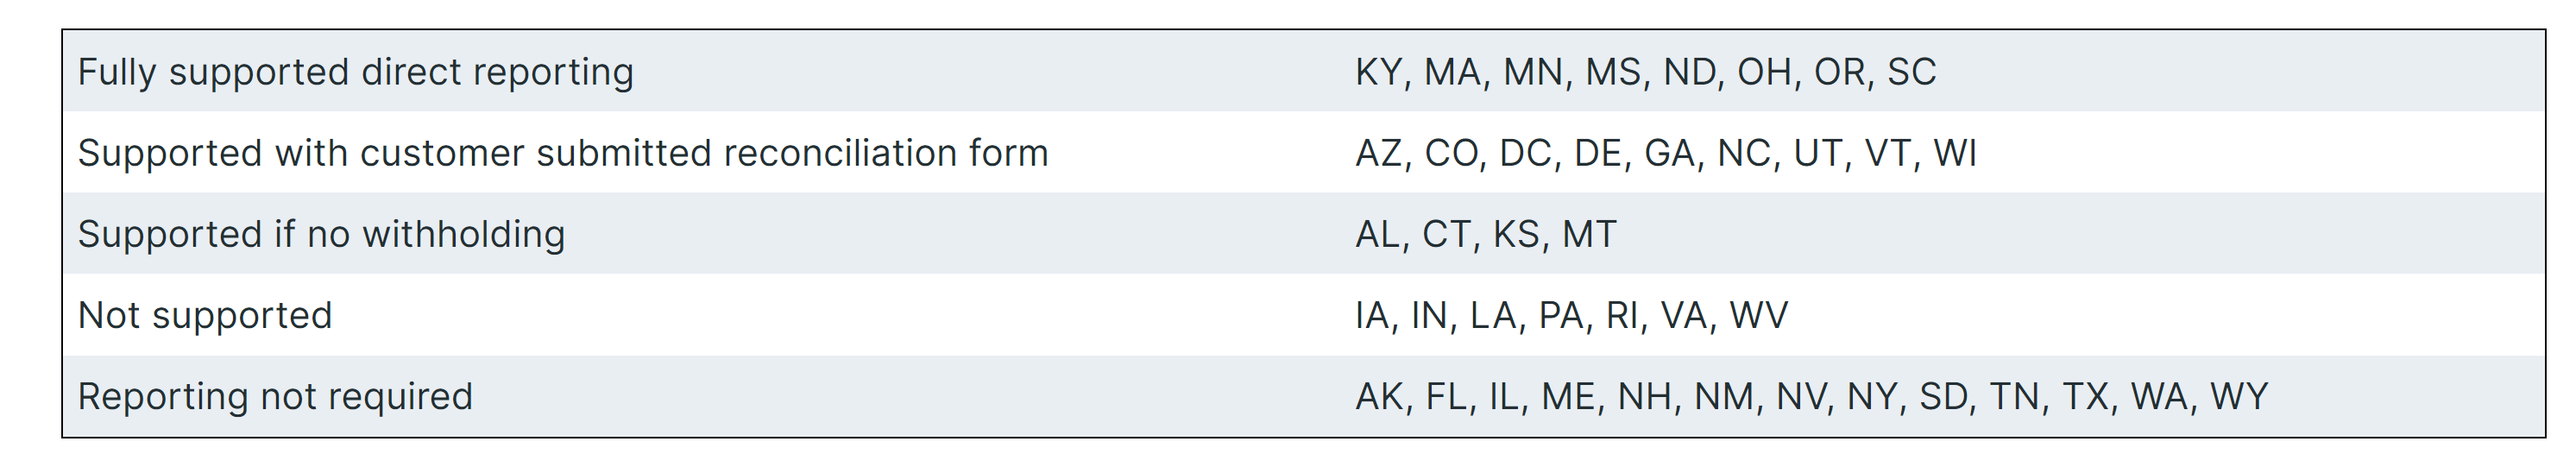 Image of an informational table with the following information: States with Fully supported direct reporting	KY, MA, MN, MS, ND, OH, OR, SC. States supported with customer submitted reconciliation form AZ, CO, DC, DE, GA, NC, UT, VT, WI. States supported if no withholding	AL, CT, KS, MT. States not supported	IA, IN, LA, PA, RI, VA, WV. States where reporting not required	AK, FL, IL, ME, NH, NM, NV, NY, SD, TN, TX, WA, WY.